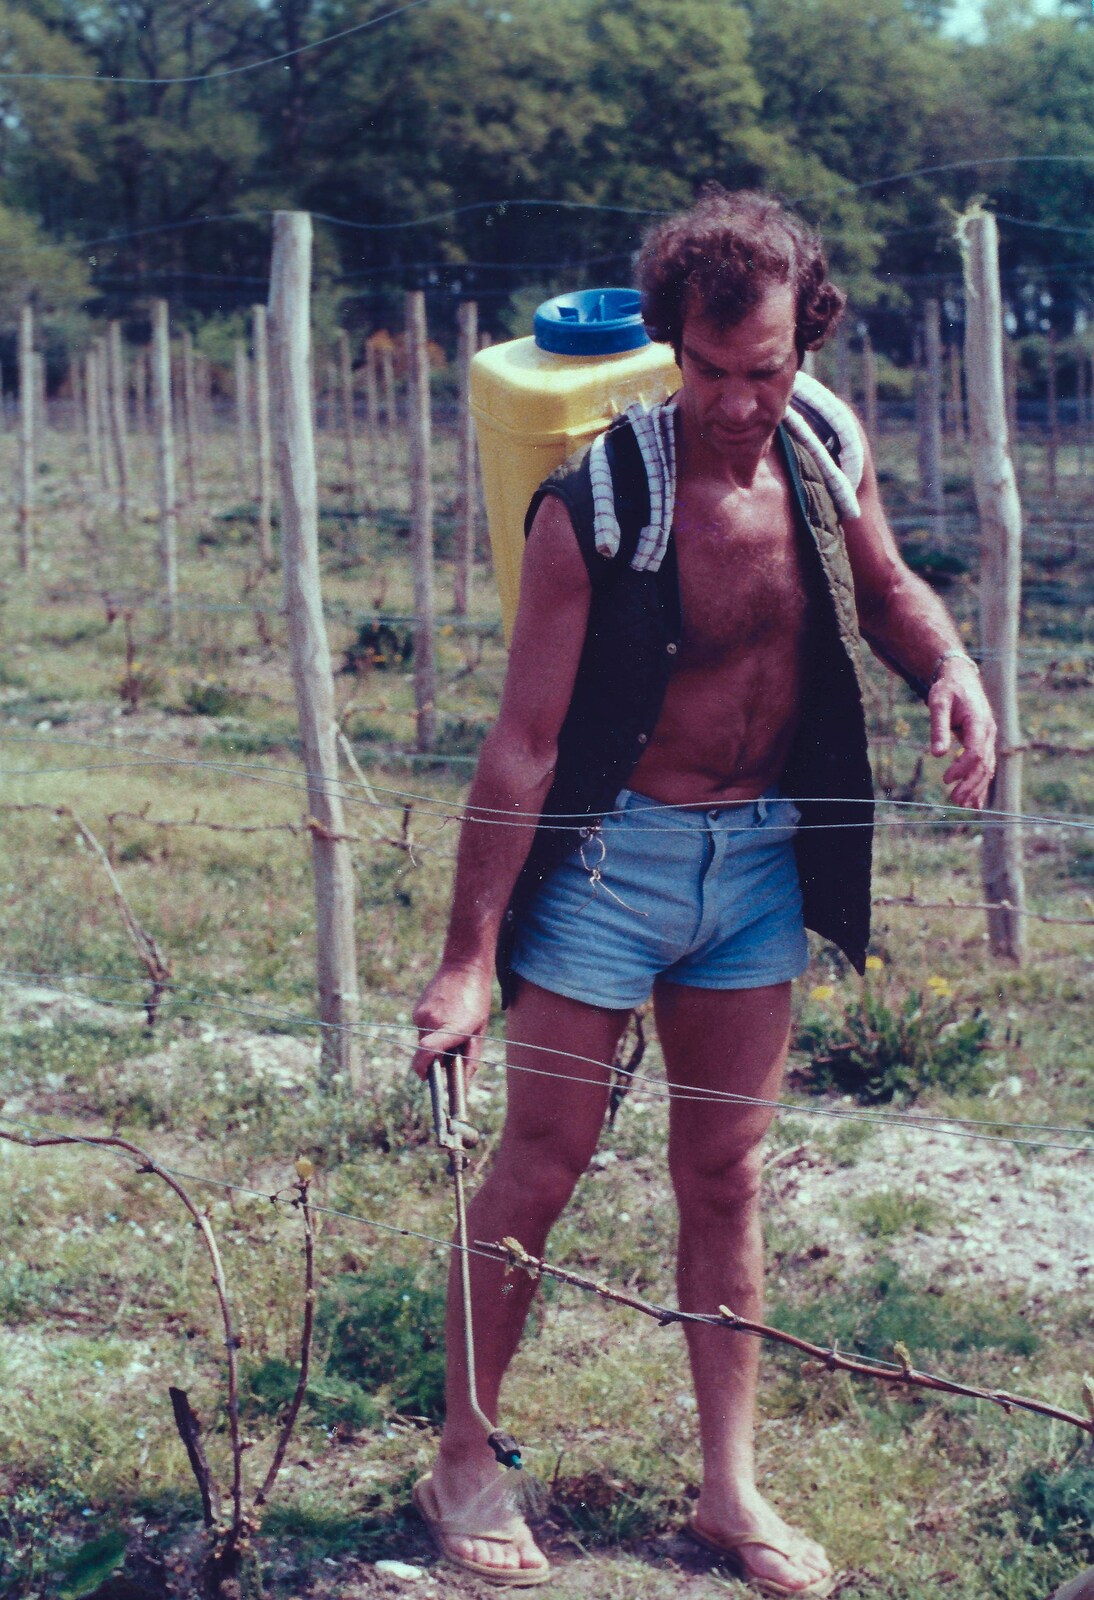 Mike does some spraying from Constructing a Vineyard, Harrow Road, Bransgore, Dorset - 1st September 1981